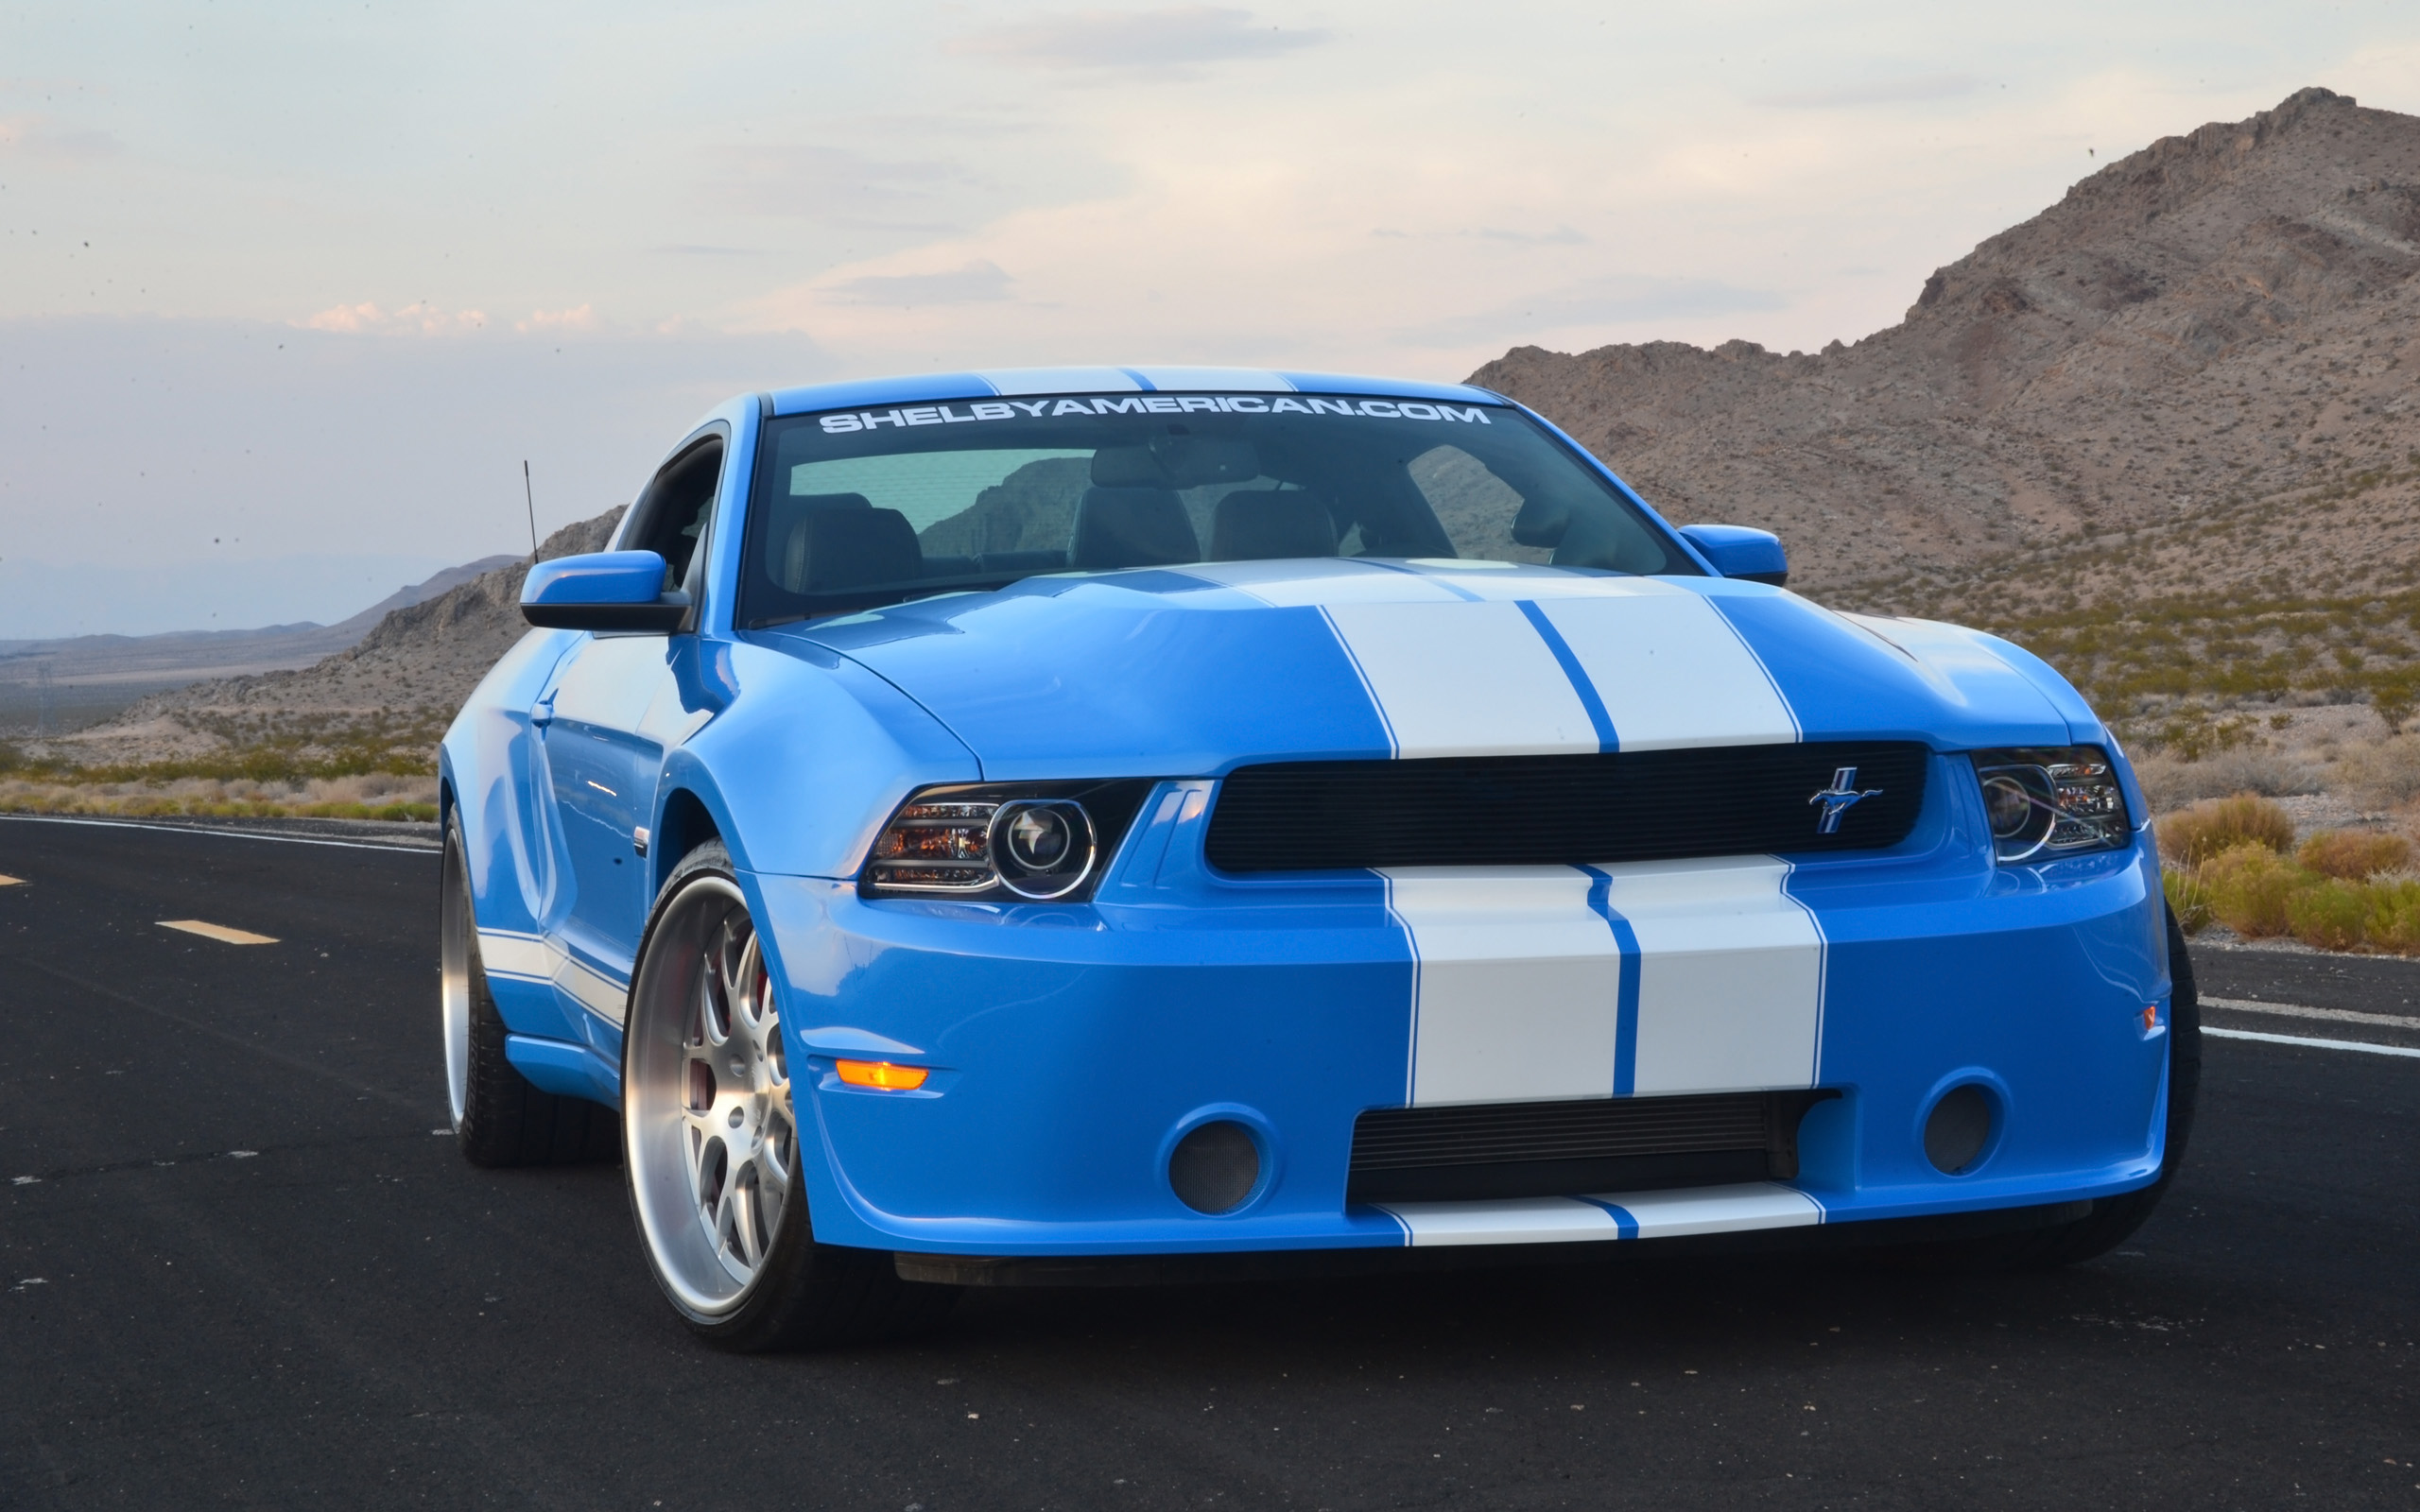 2013, Shelby, Gts, Ford, Mustang, Muscle, Supercar Wallpaper